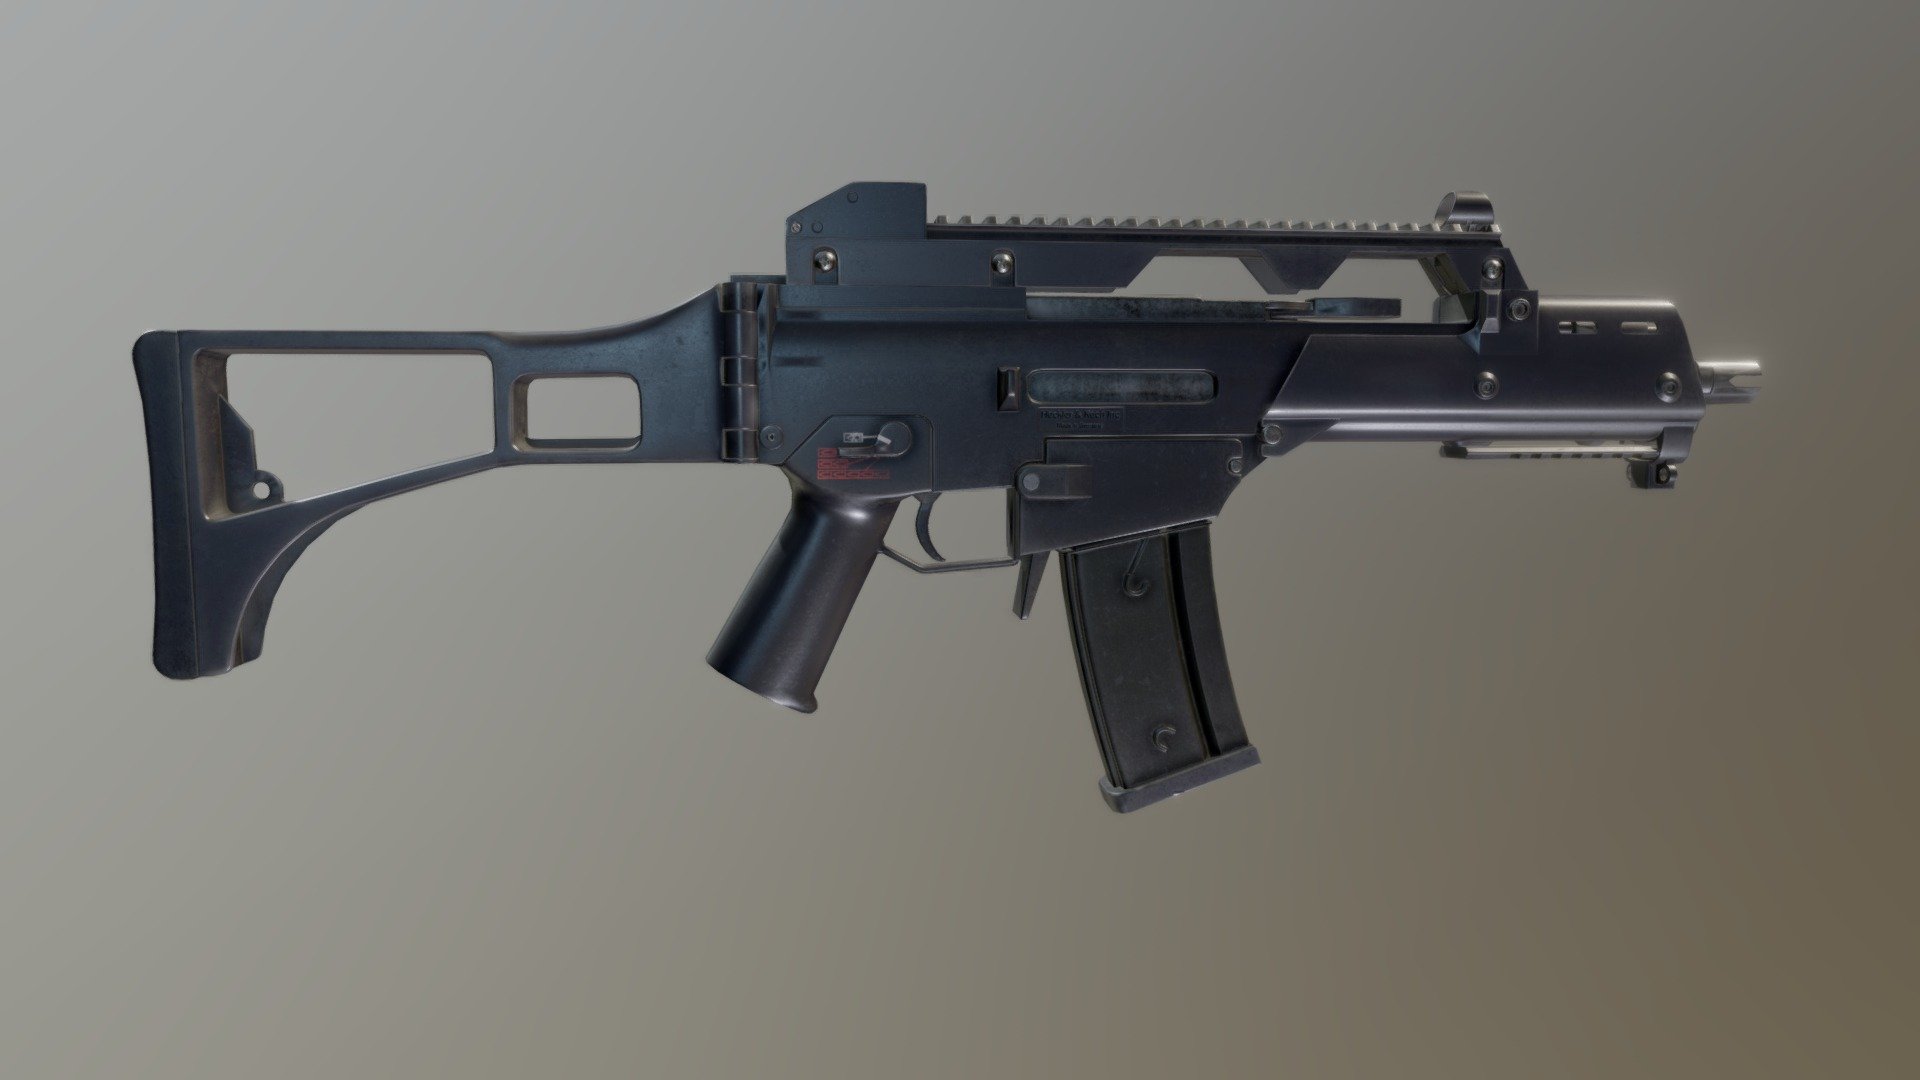 A G36C that I made in 3DS max and Substance Painter 3d model